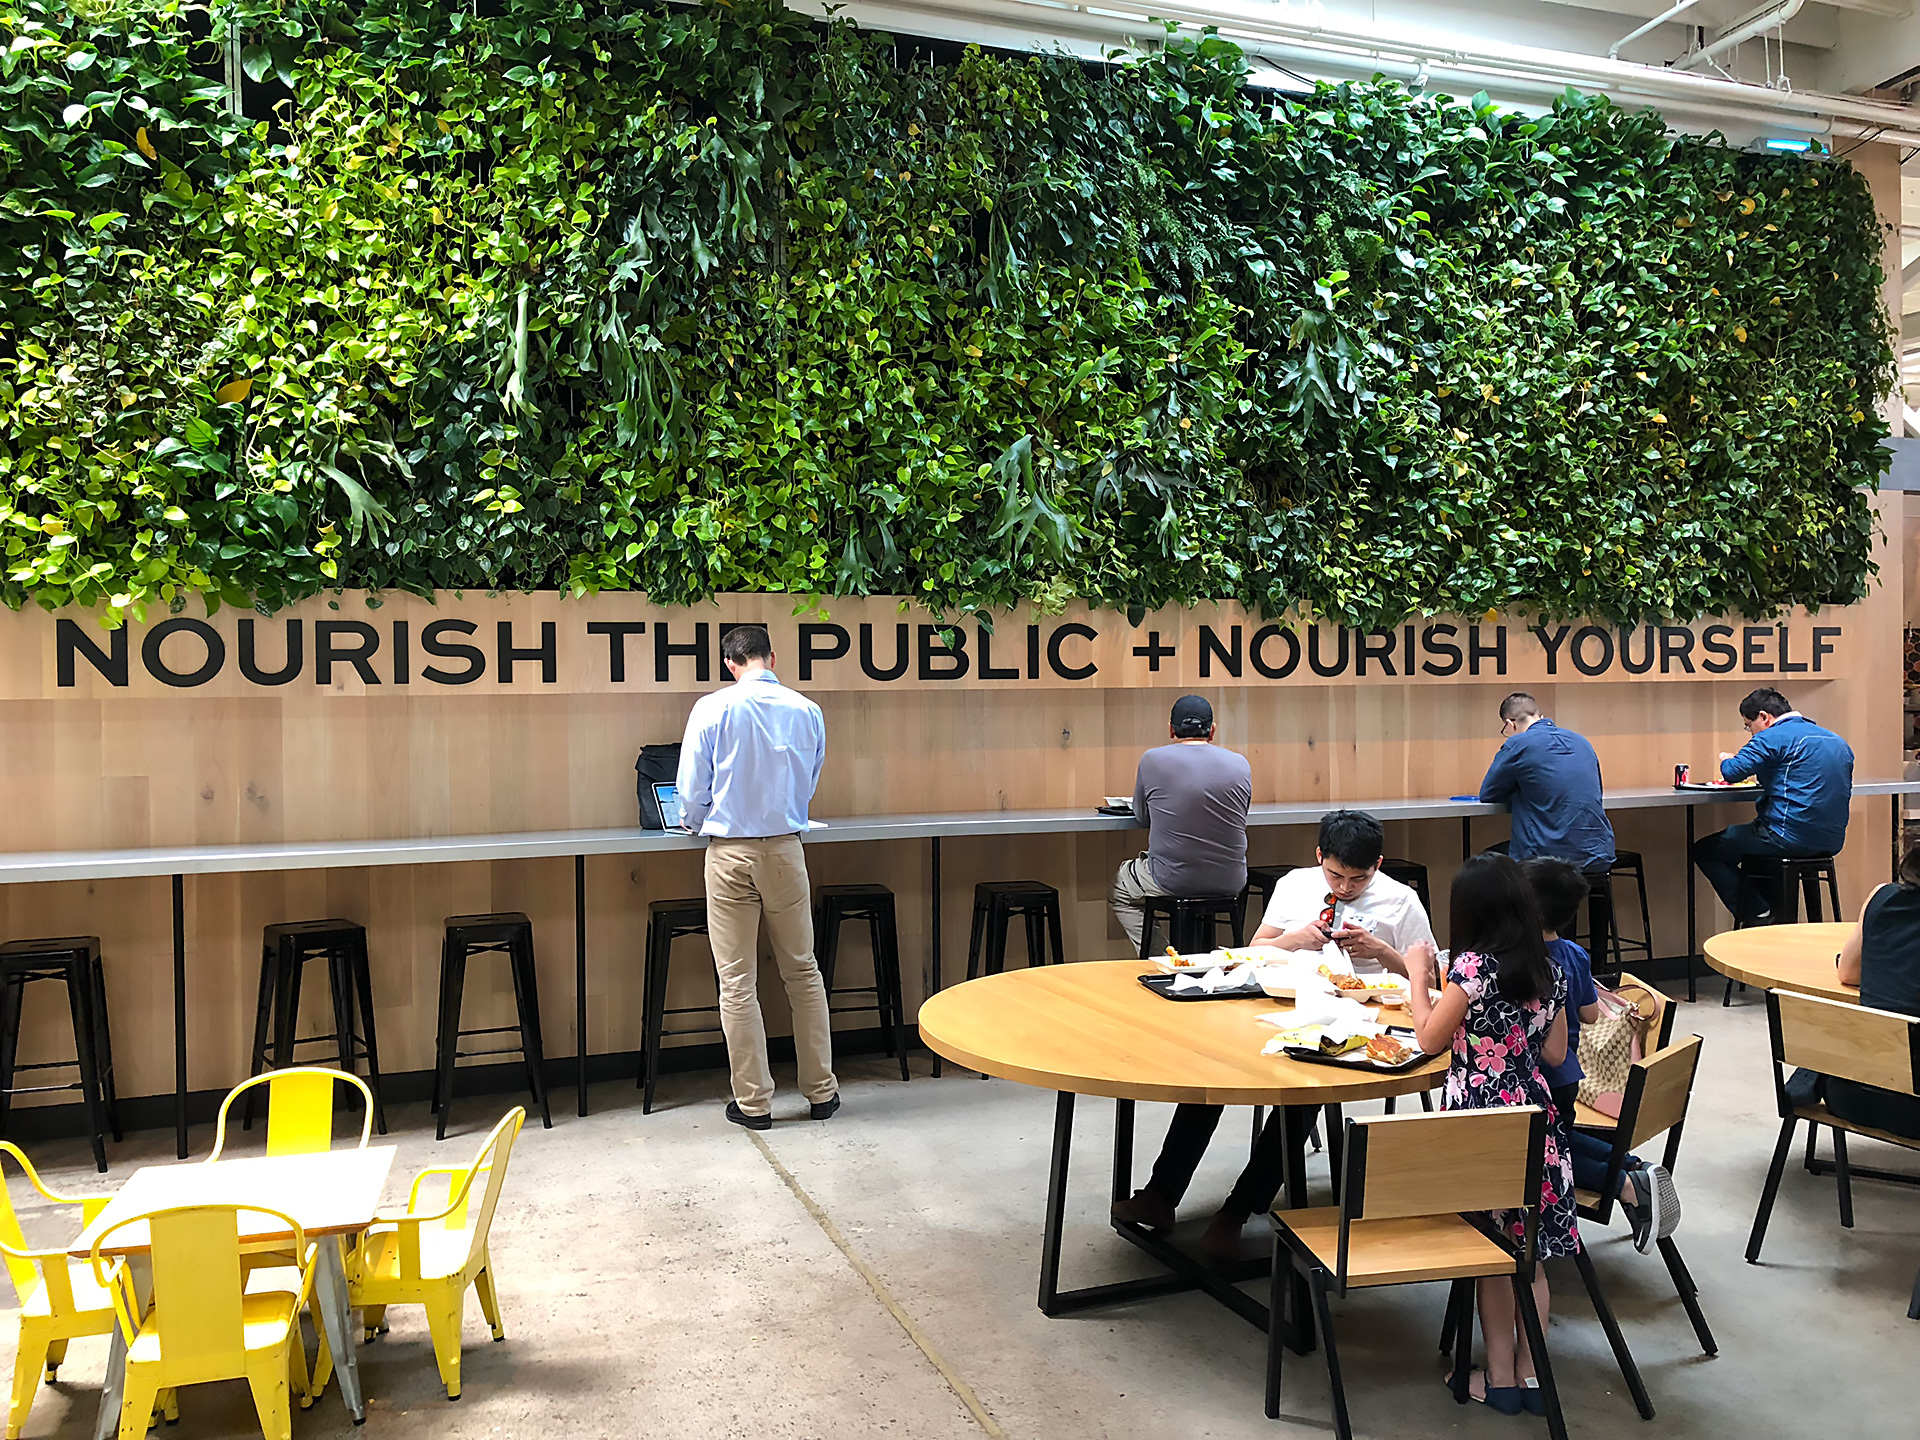 "Nourish The Public + Nourish Yourself" signage at The Emeryville Public Market next to Minnie Bell's kiosk.